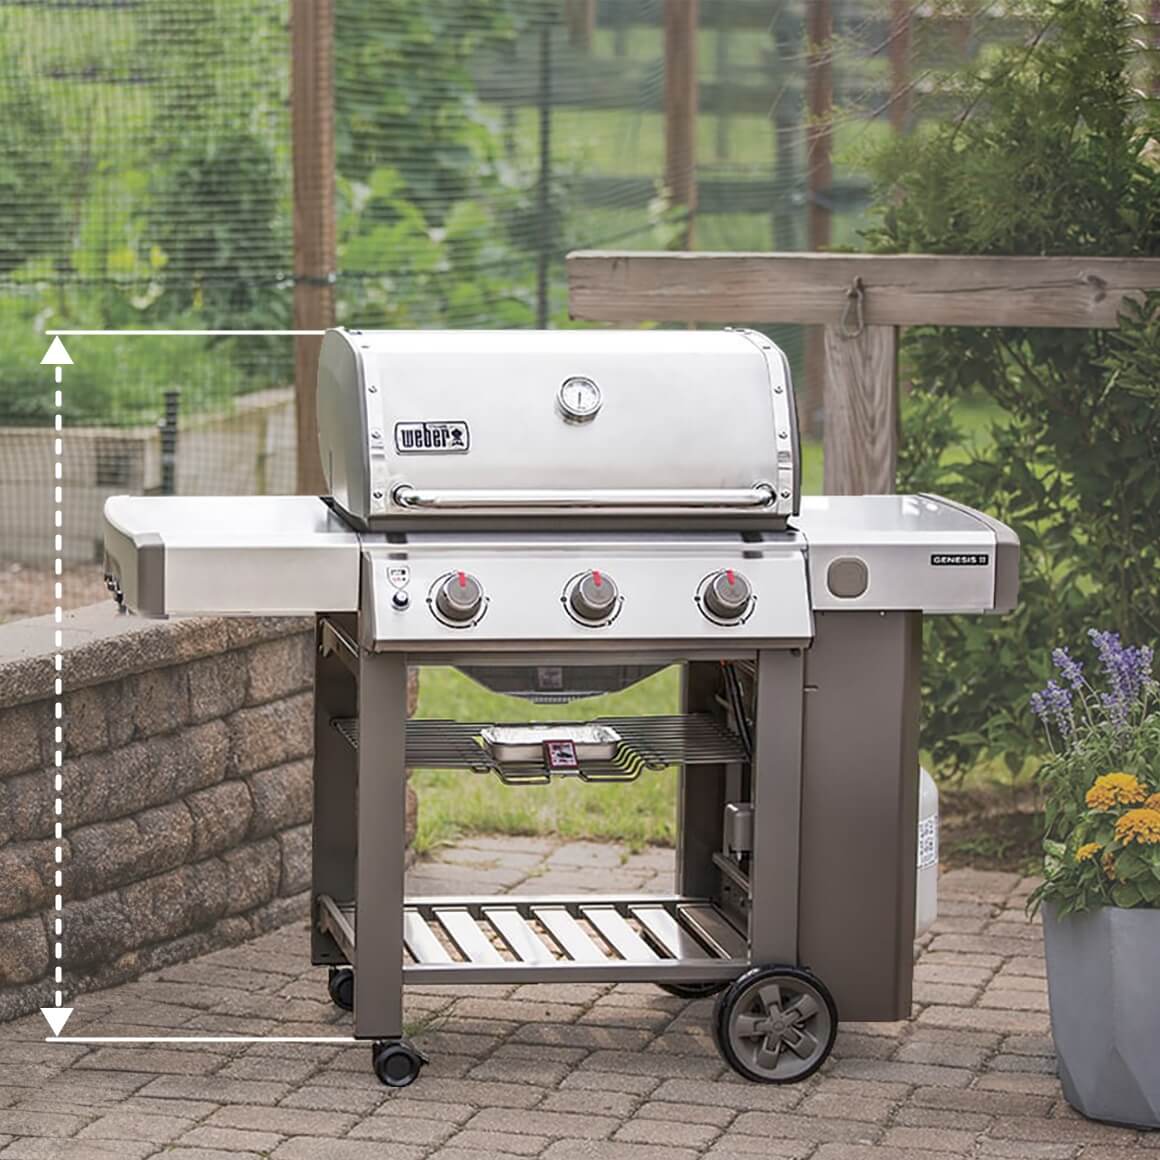 Measure the Height of Your BBQ